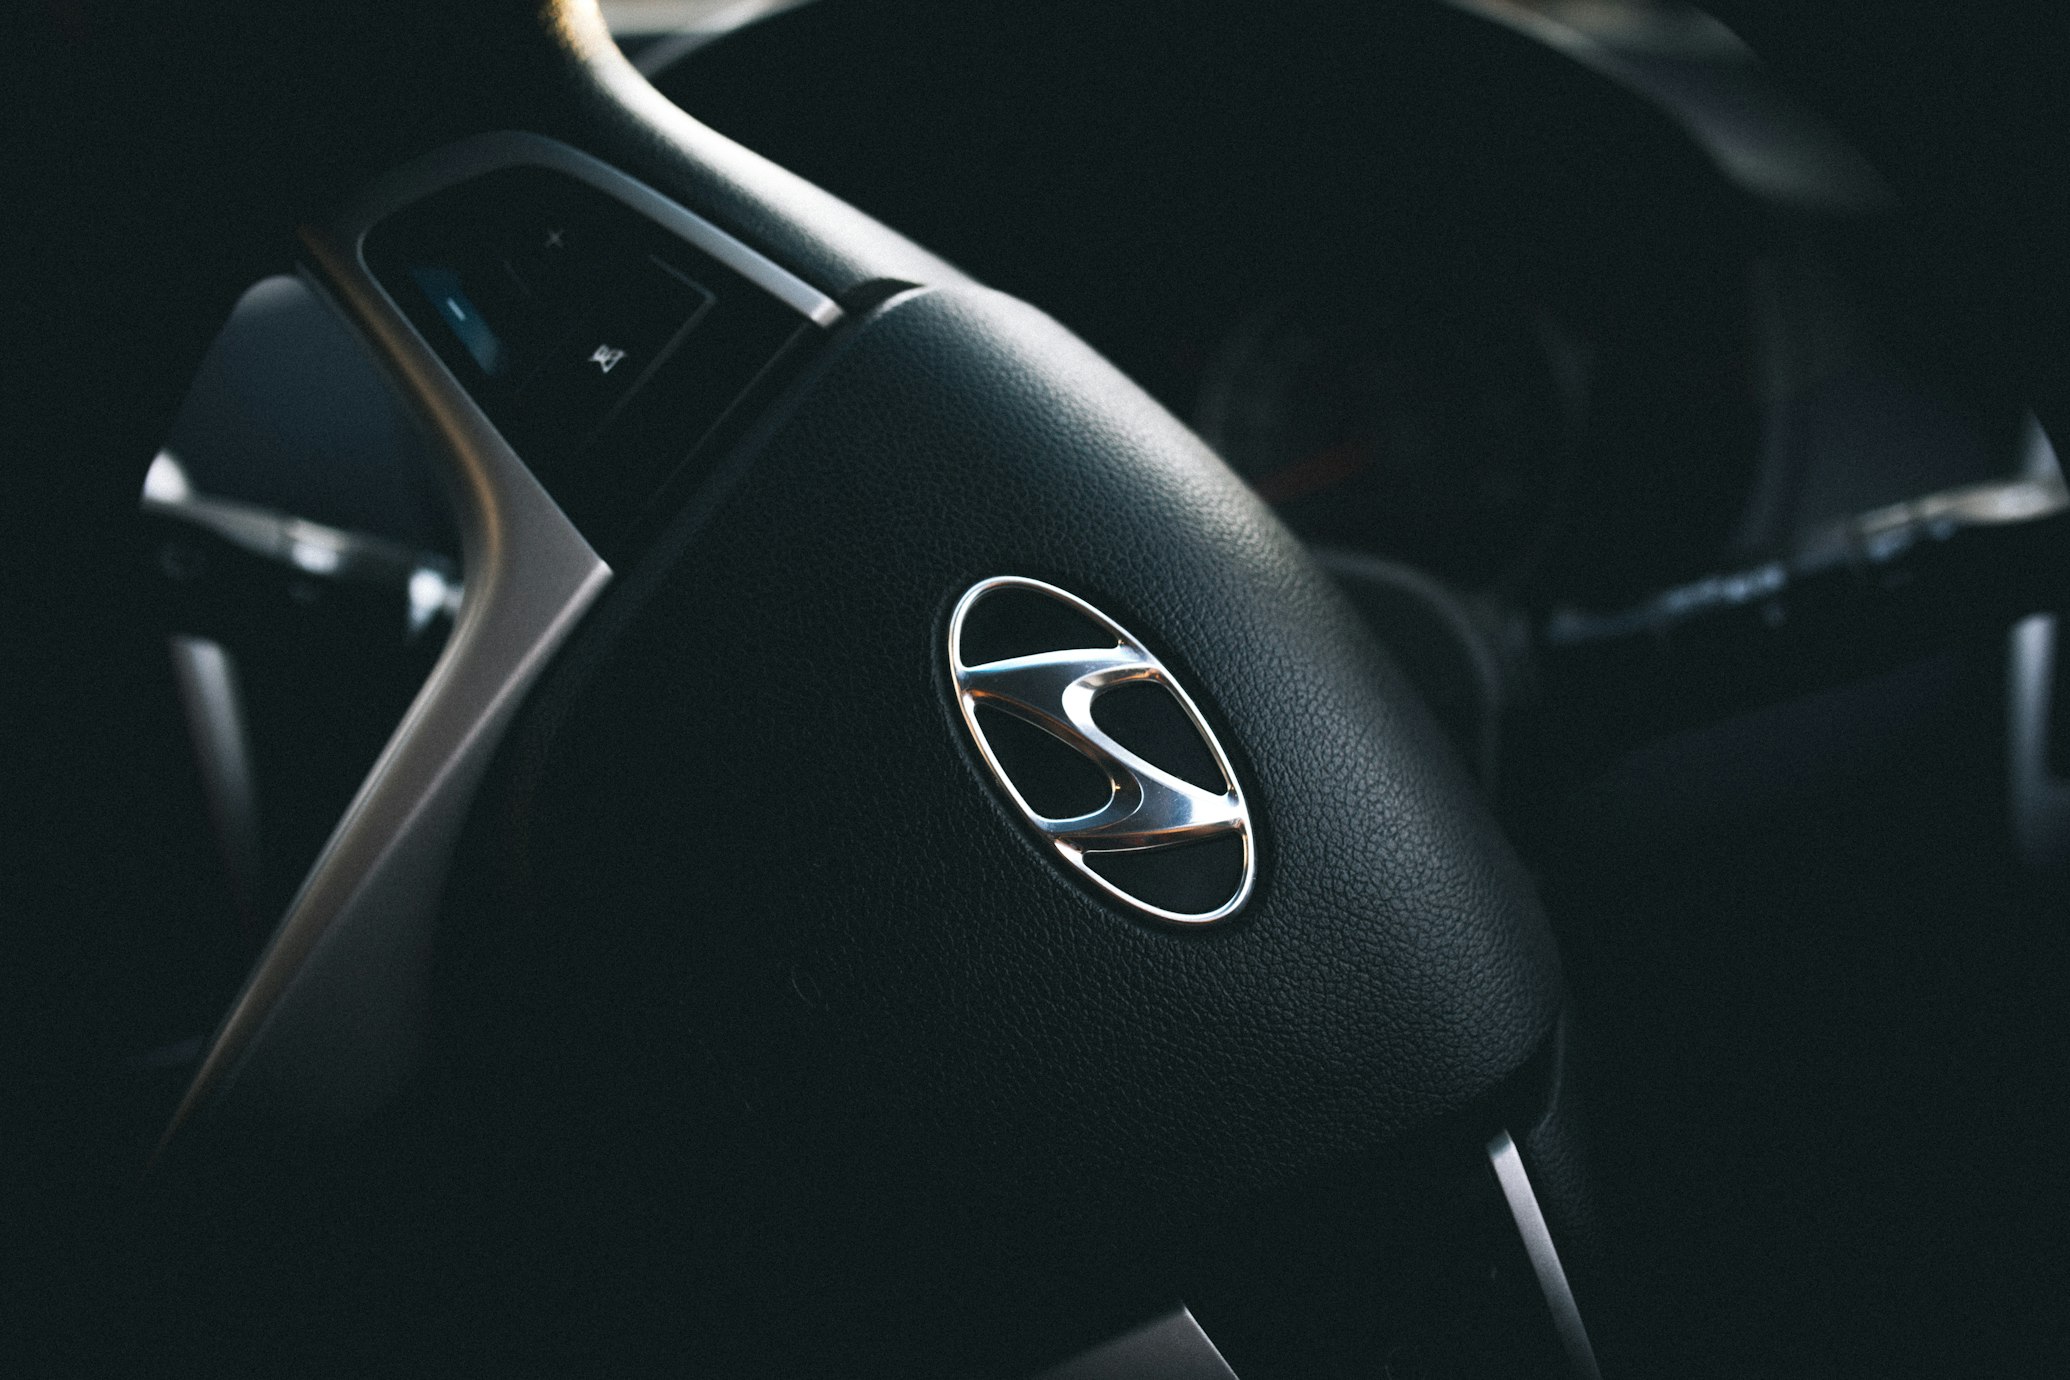 A Hyundai Steering Wheel in a mid turn going right